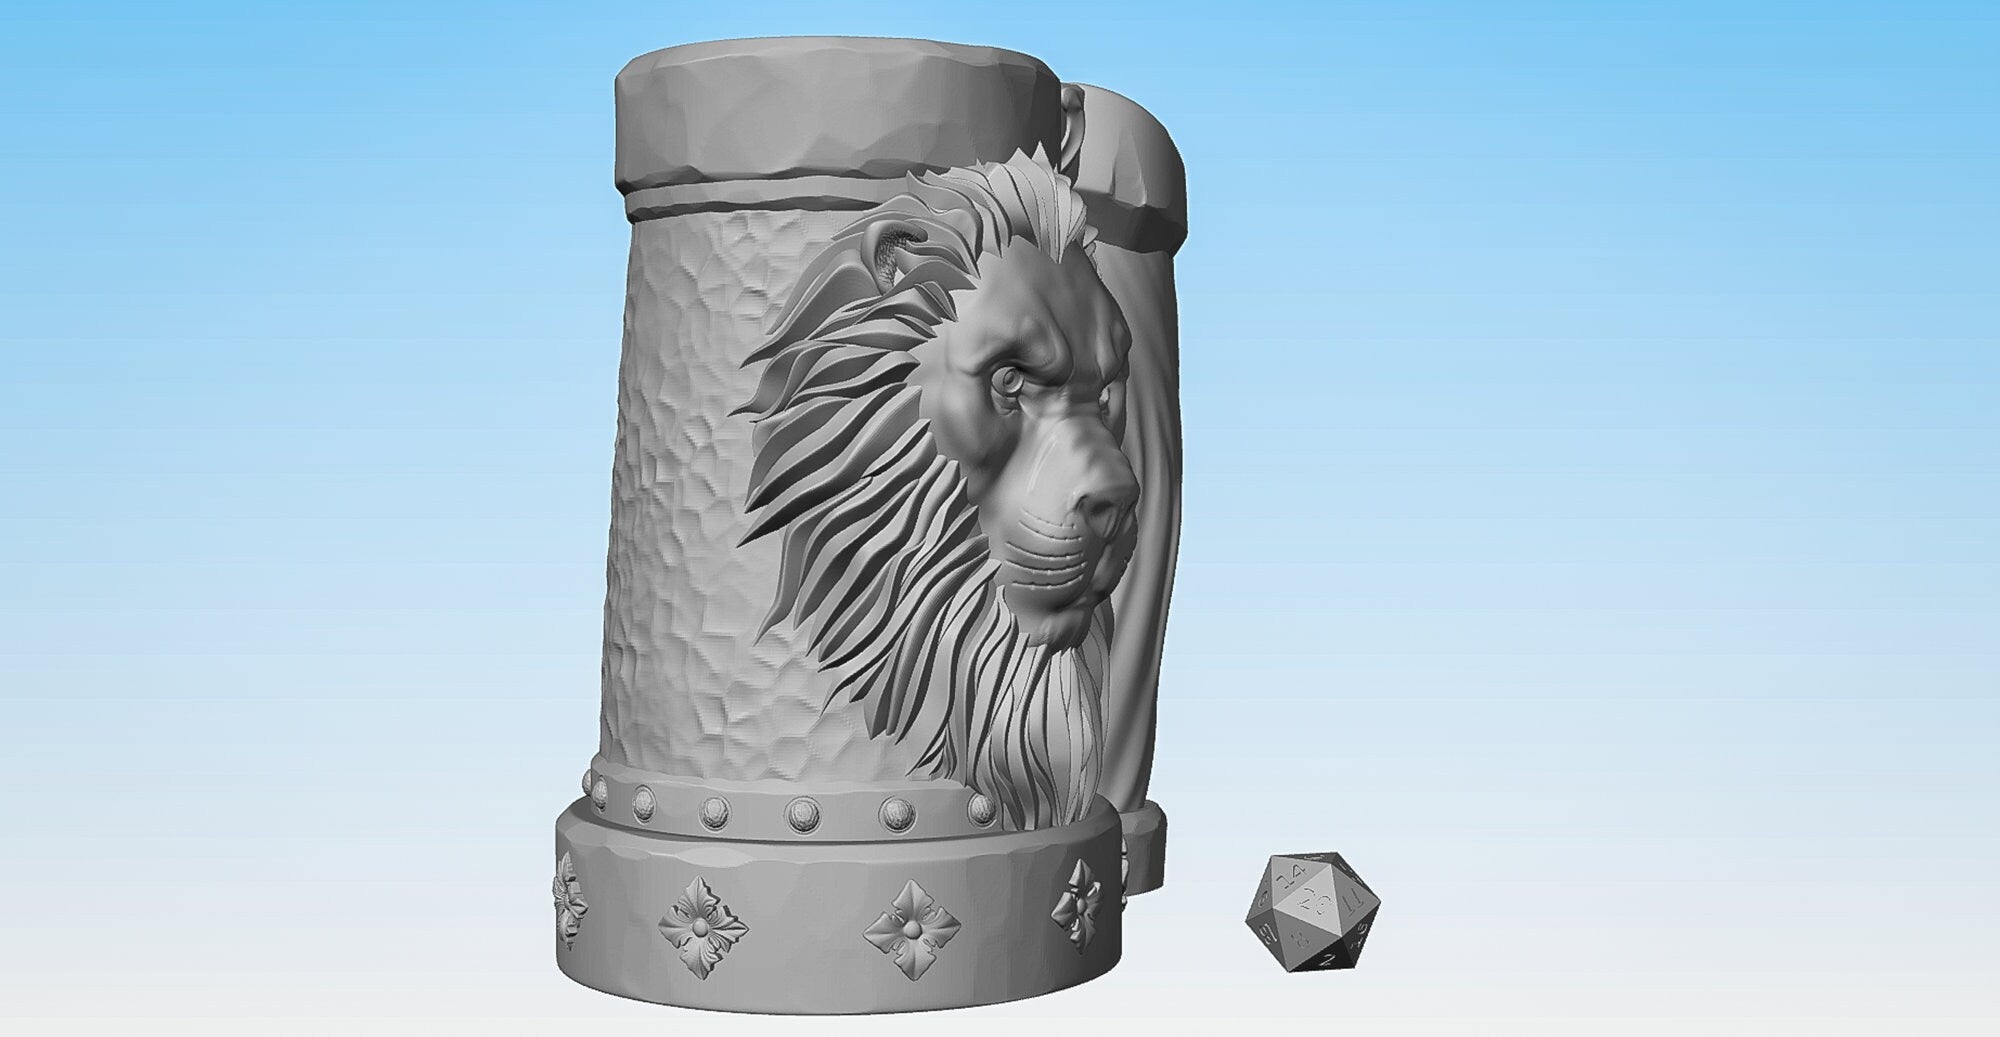 The LION BREW | Mythic Mug | Larp | Gaming Zubehör | Tabletop | Dice Cup | Box | Holder | Dungeons and Dragons | DnD | RPG | Fantasy-Role Playing Games